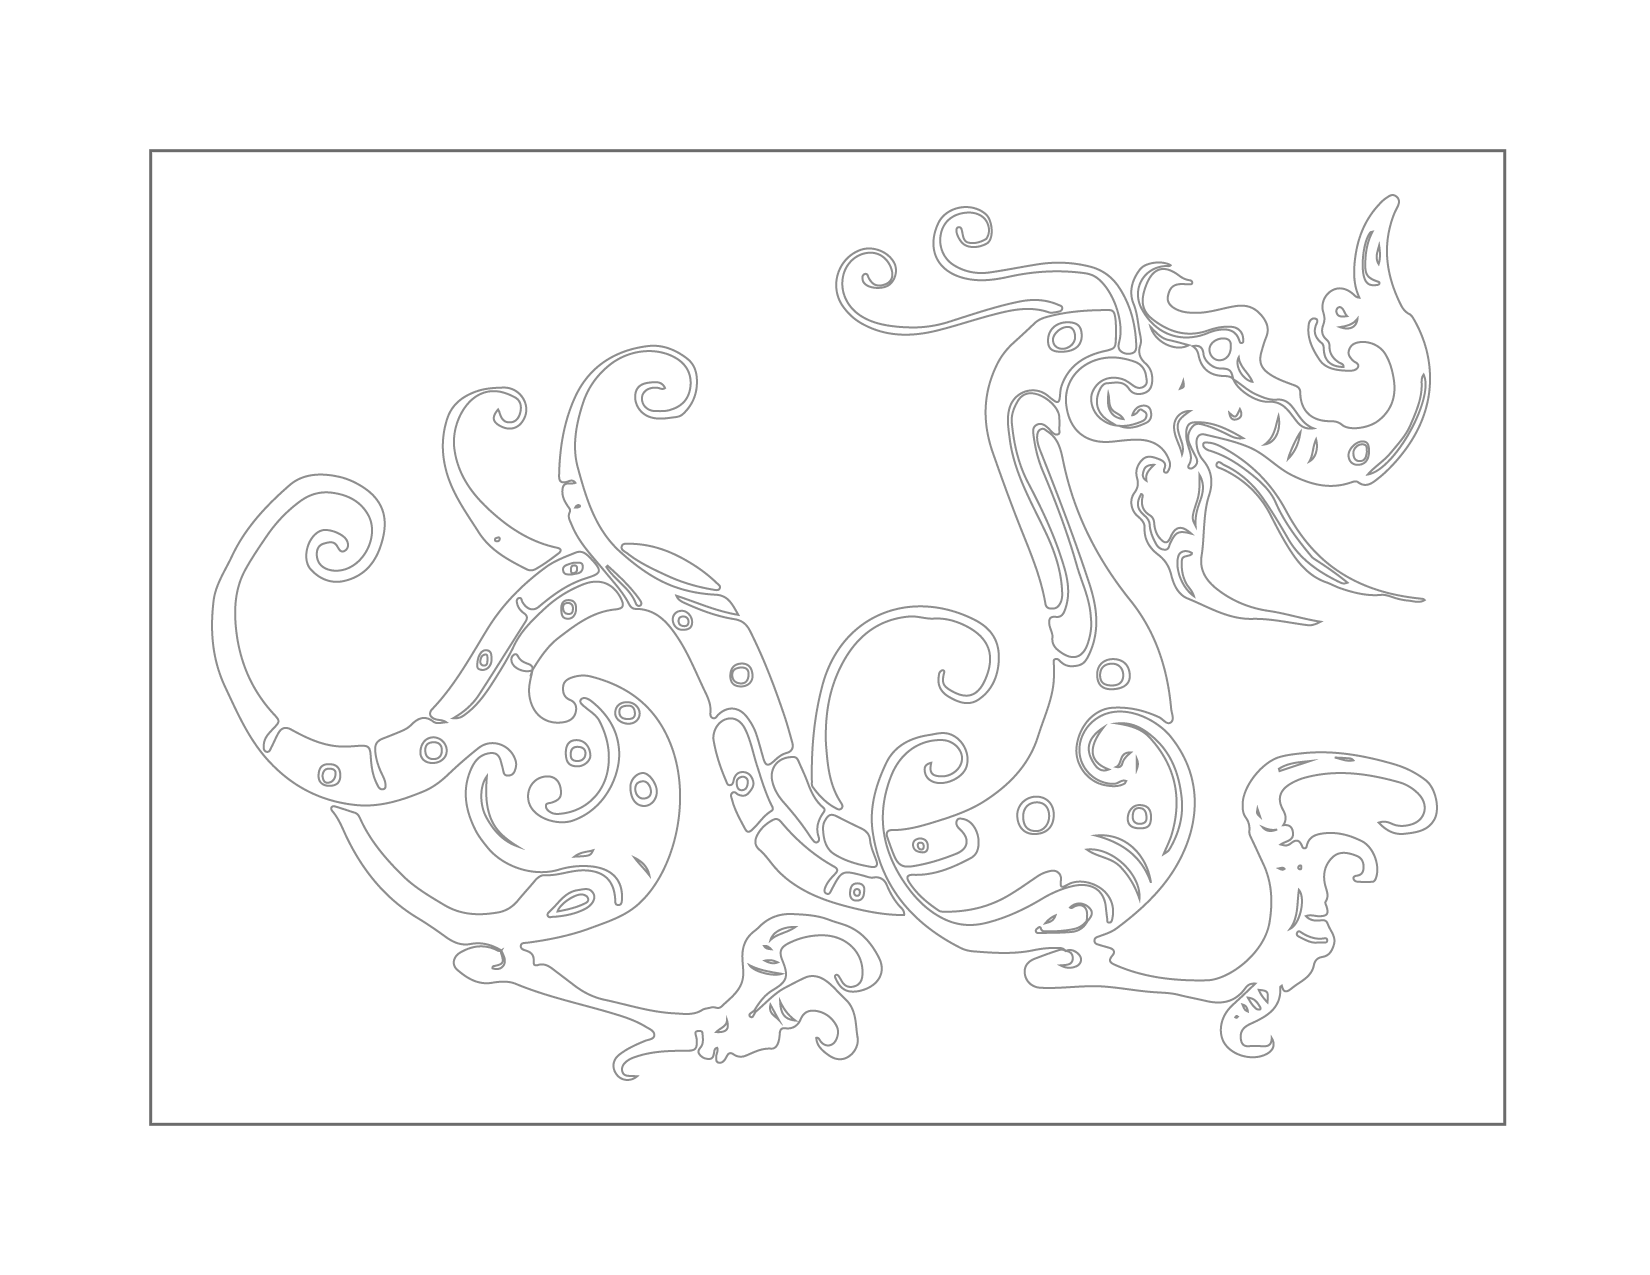 Traceable Dragon Drawing Coloring Sheet